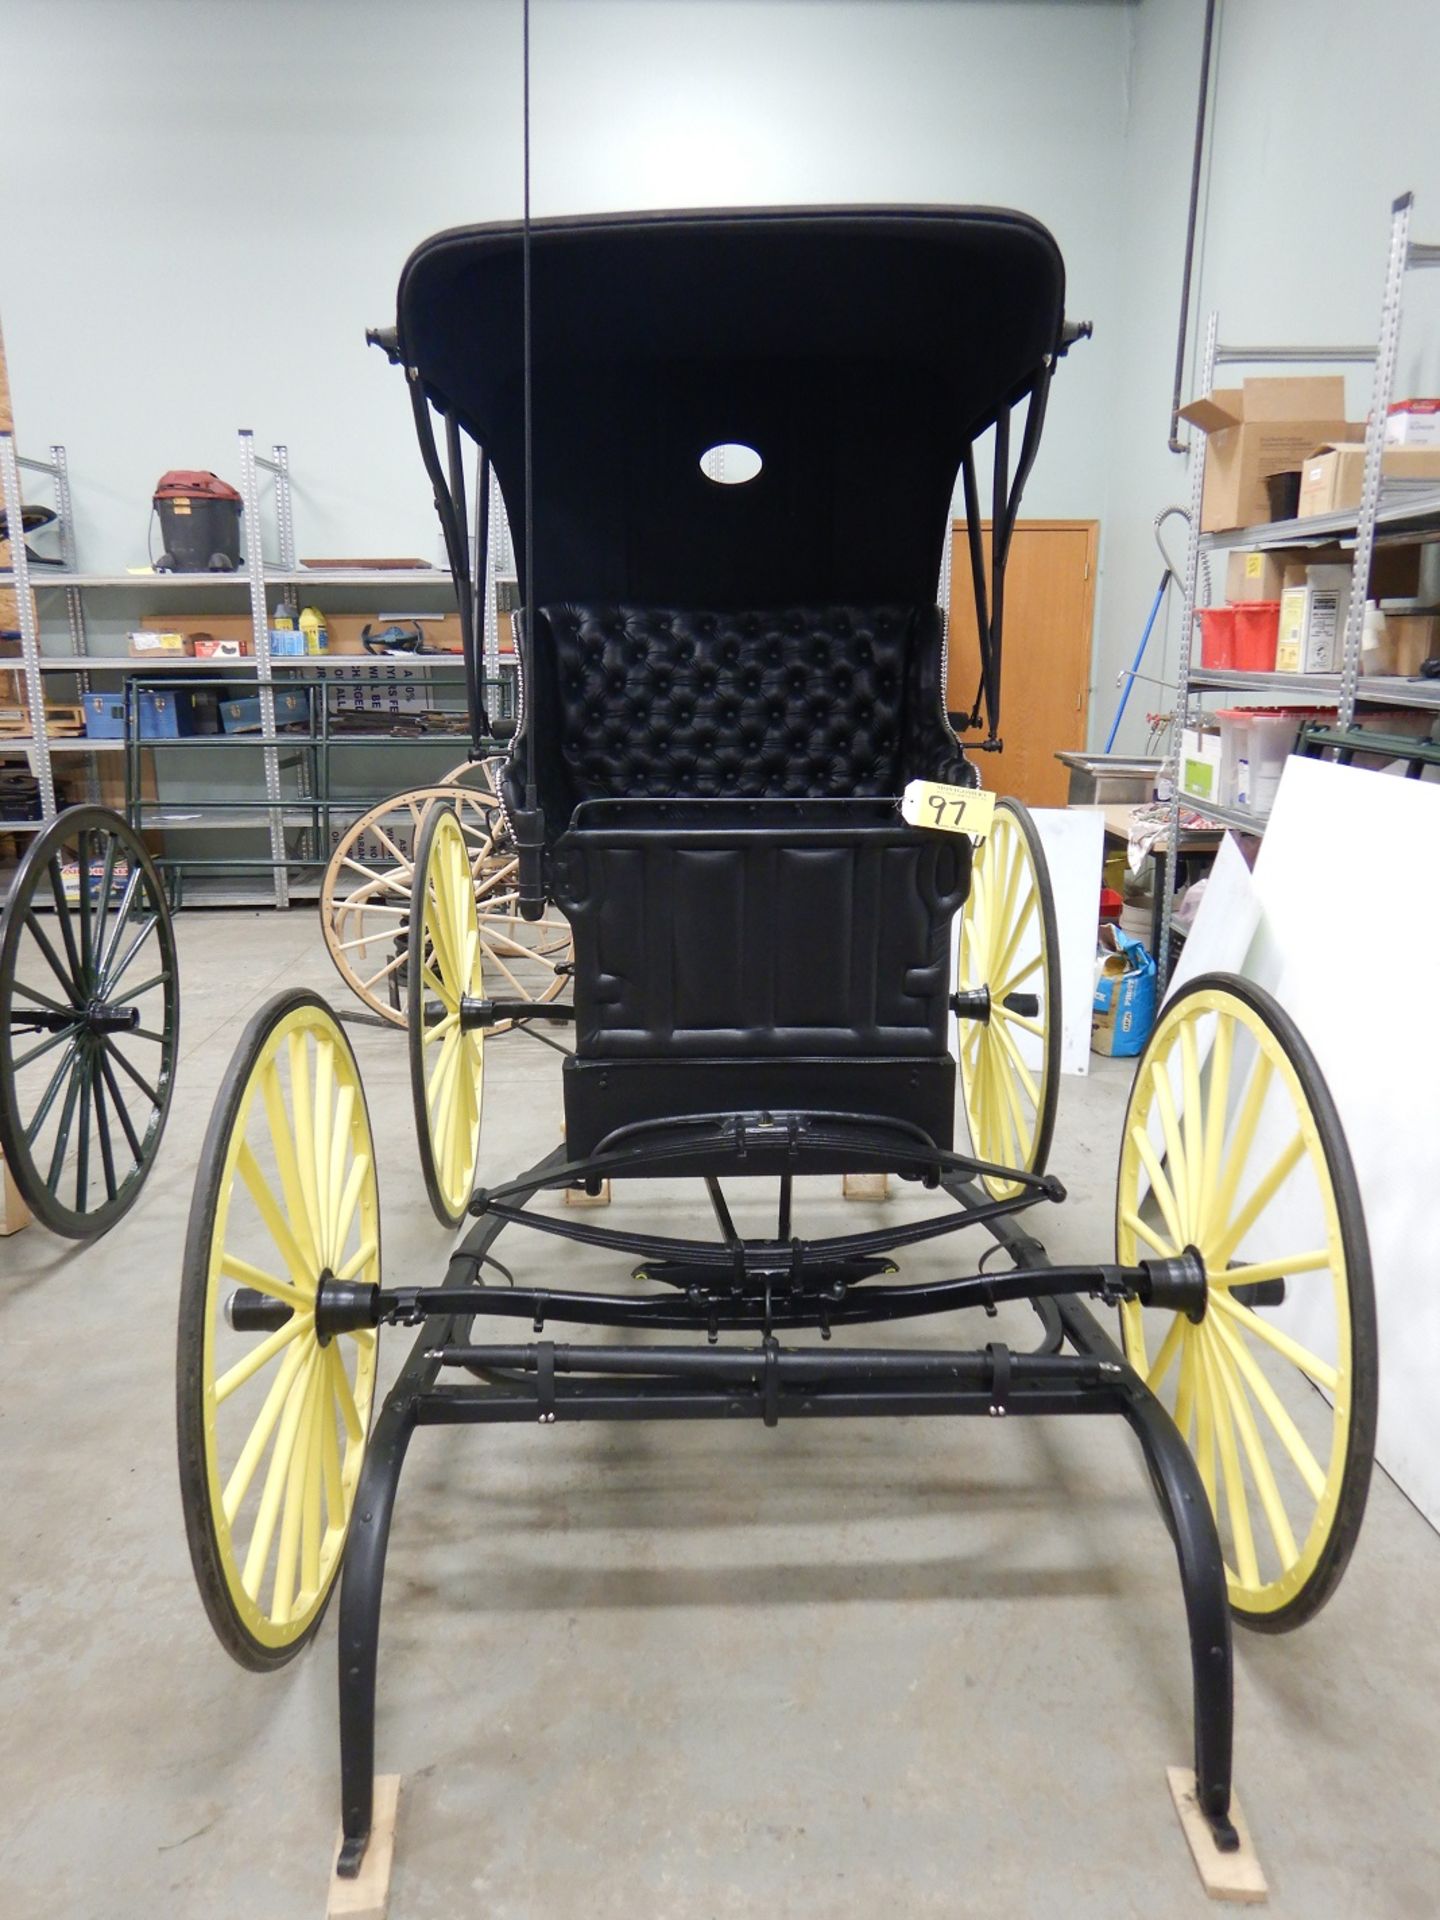 FRESH RESTORATION OF DOCTOR'S BUGGY W/SHALVES, RUBBER TIRES, DONE BY JIM TRONNES